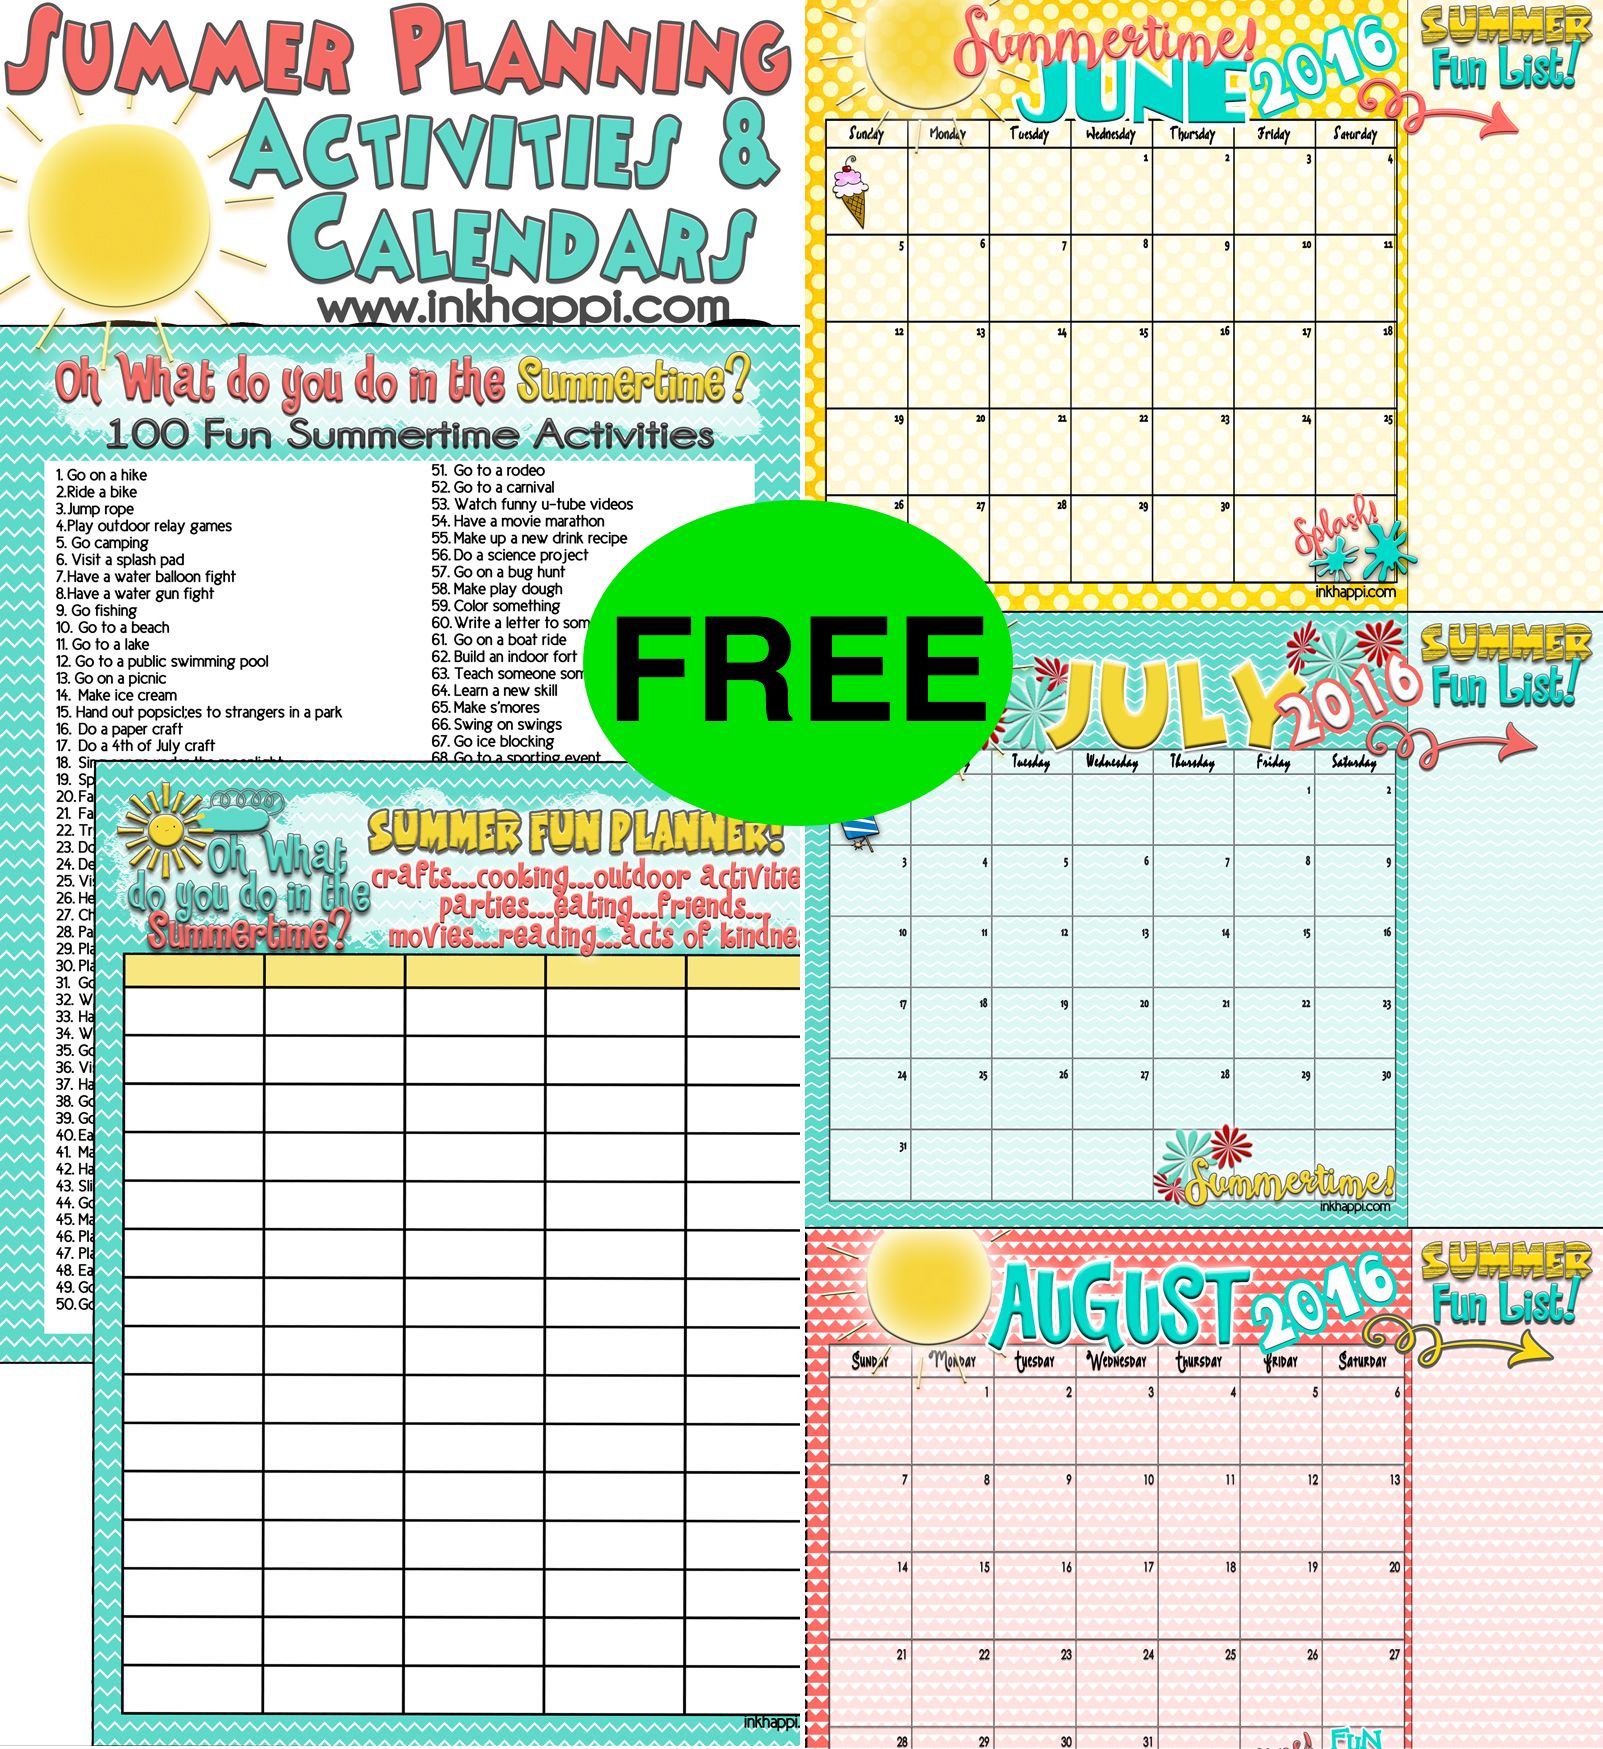 FREE Summer Activities and Calendar Printable!